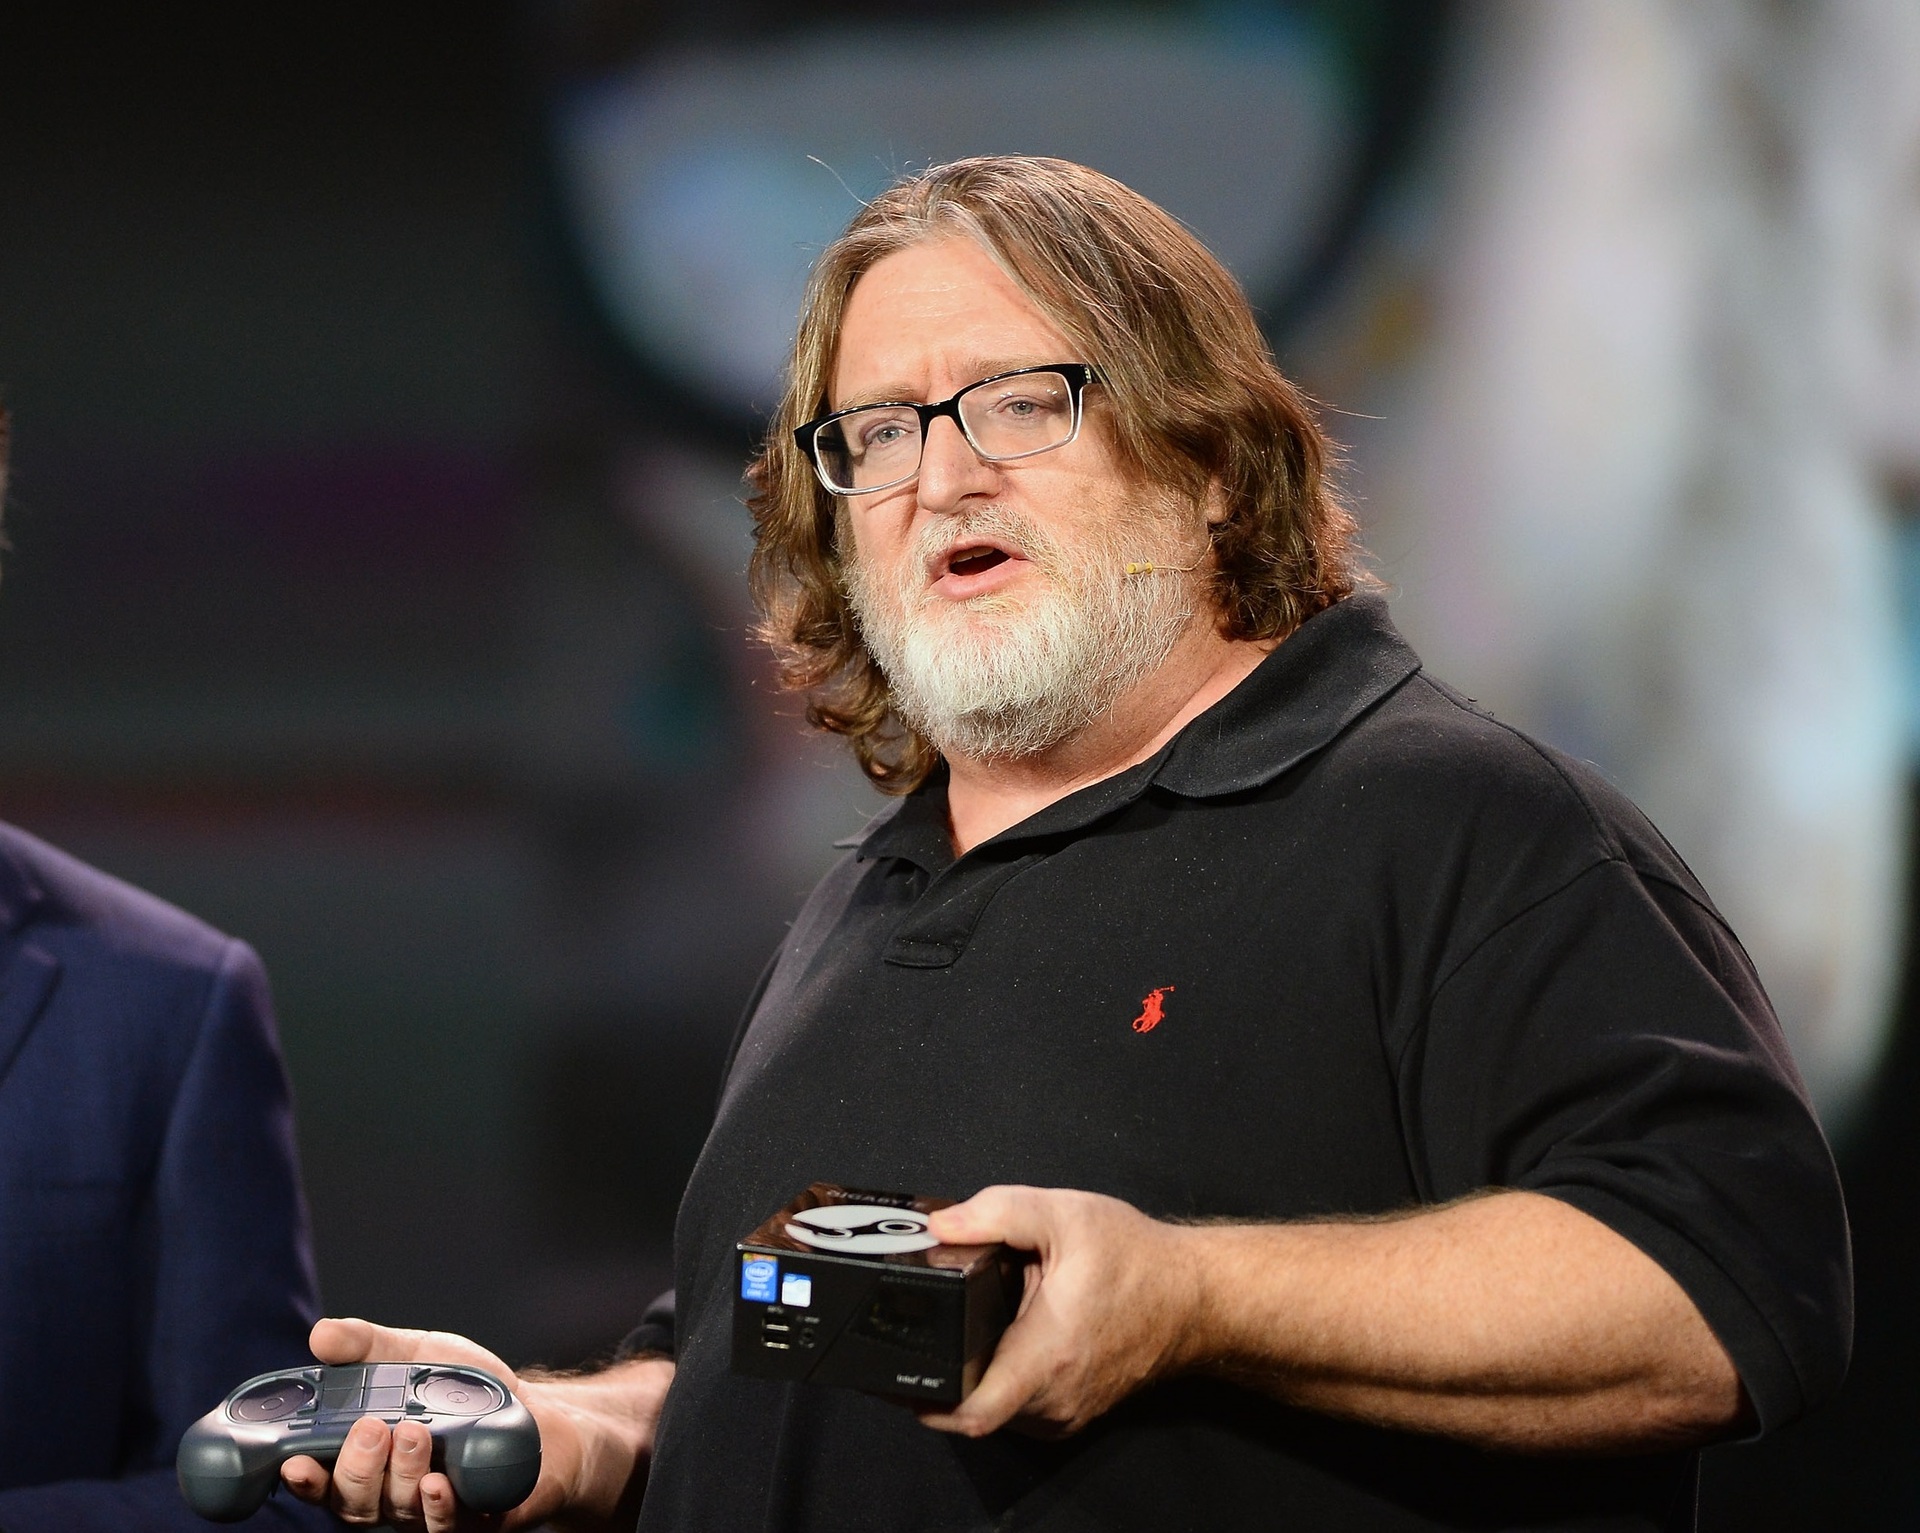 Gabe Newell may be meeting with New Zealand leadership to discuss  relocating Valve